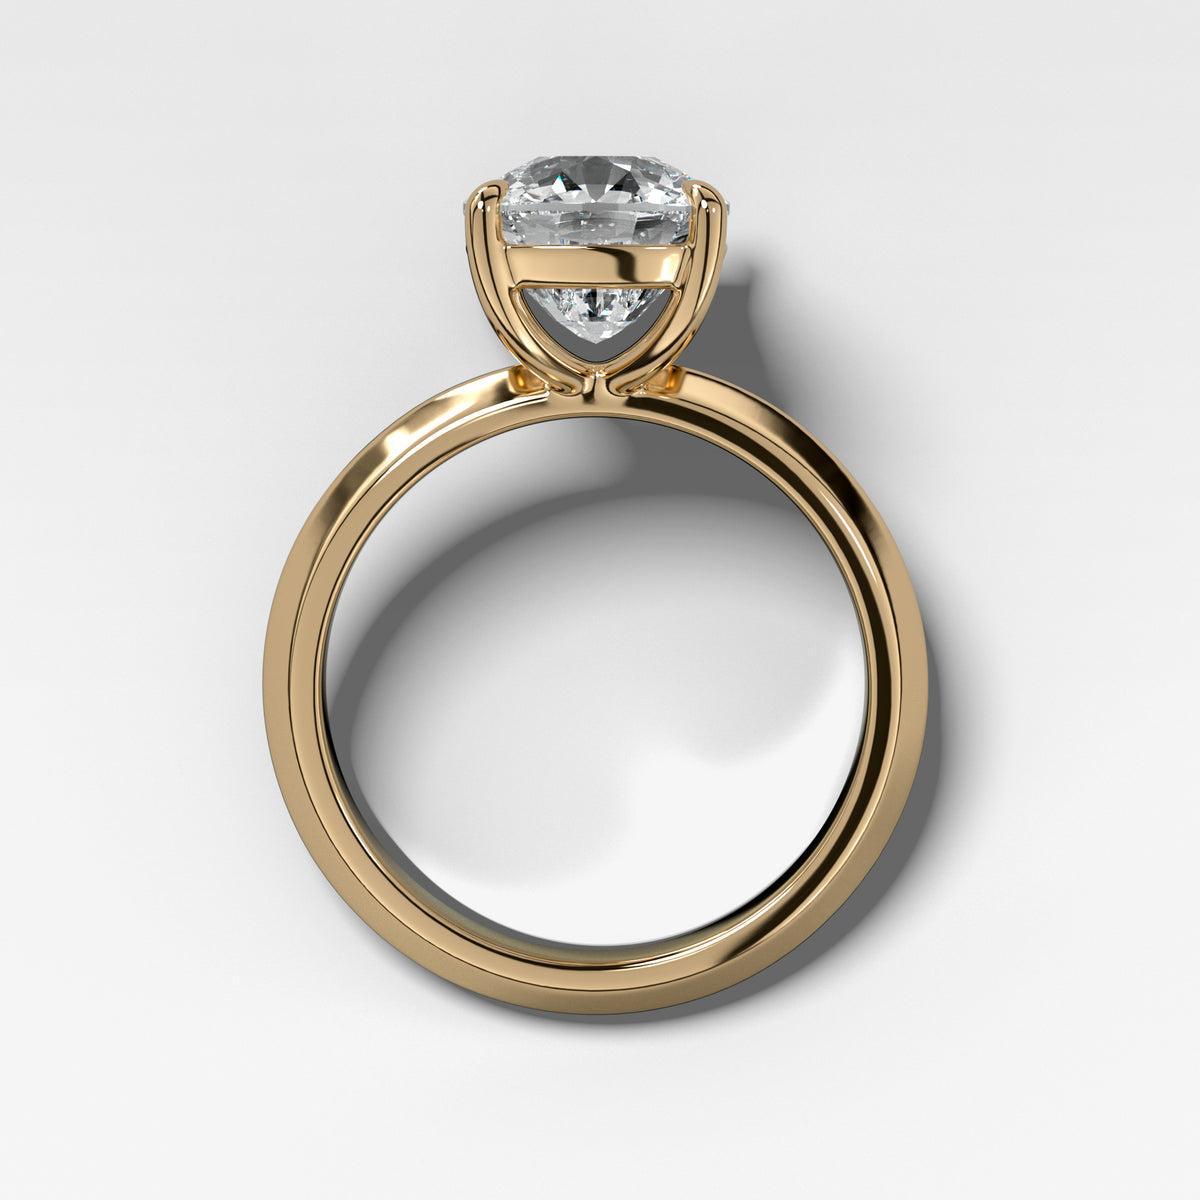 Butter Knife Solitaire Engagement Ring With Elongated Cushion Cut Diamond